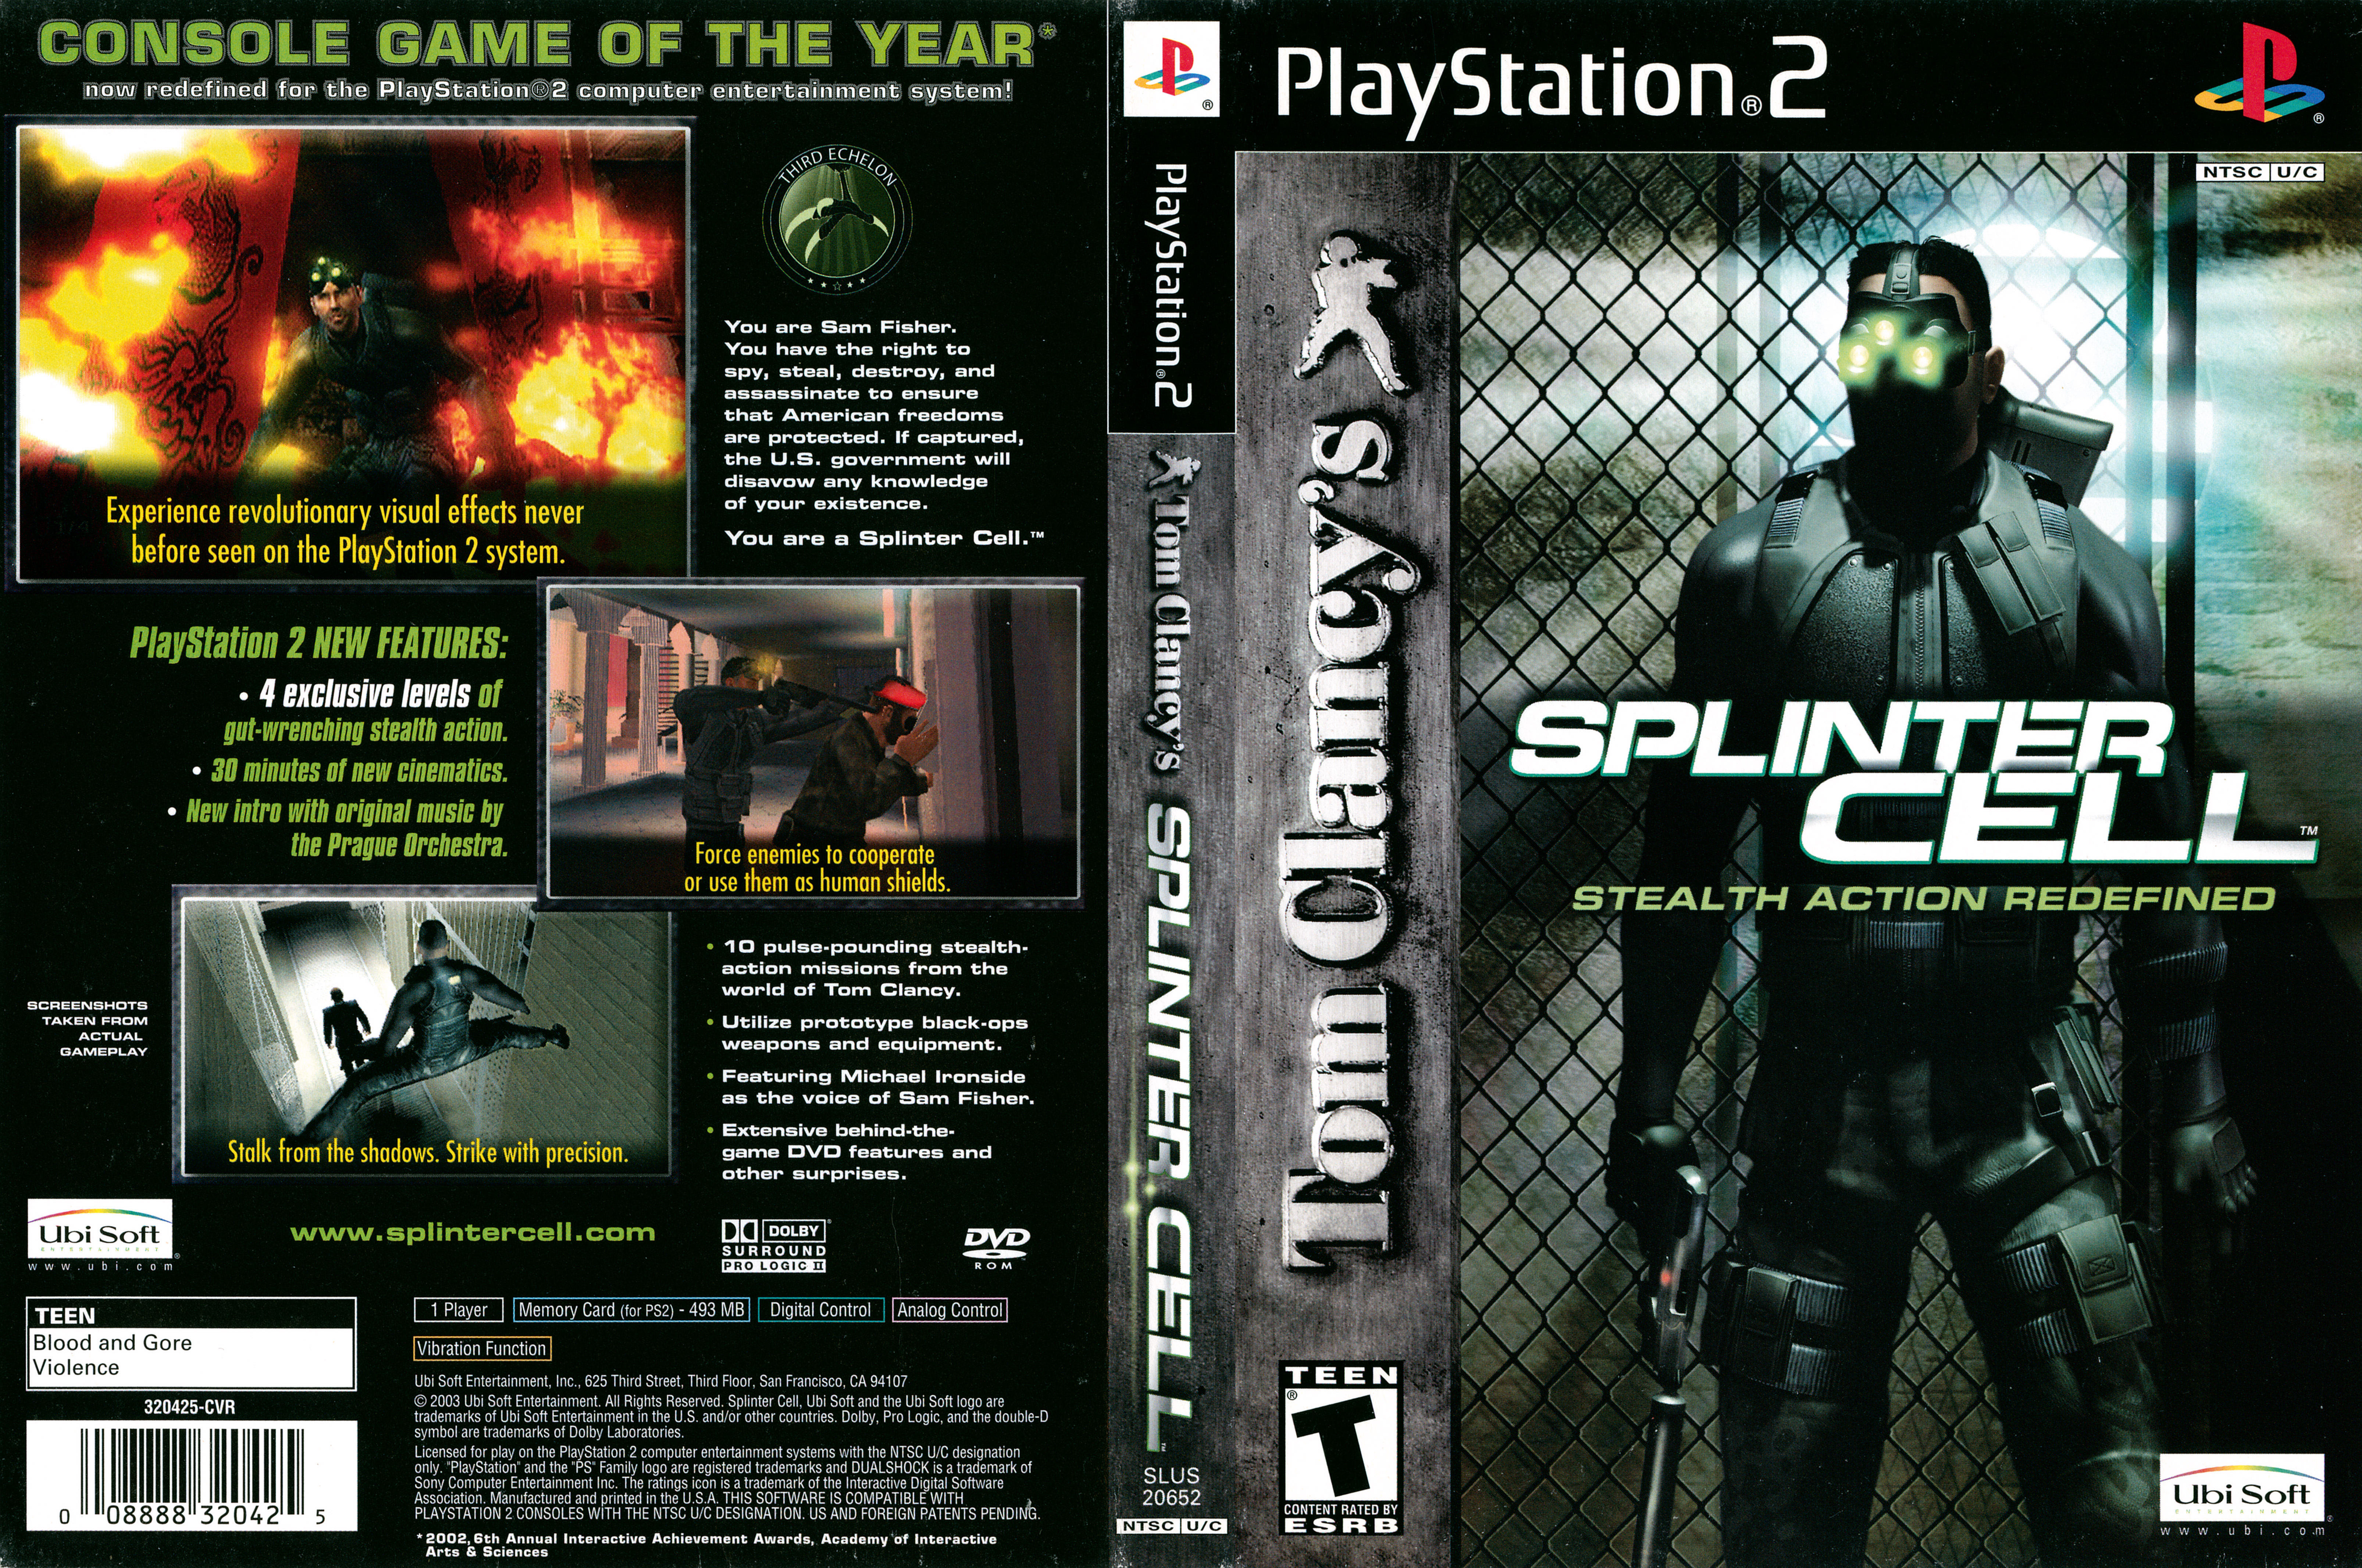 Playstation 2 русский язык. Tom Clancy's Splinter Cell ps2. Splinter Cell PLAYSTATION 2. Tom Clancy's Splinter Cell ps2 обложка. Splinter Cell ps1.